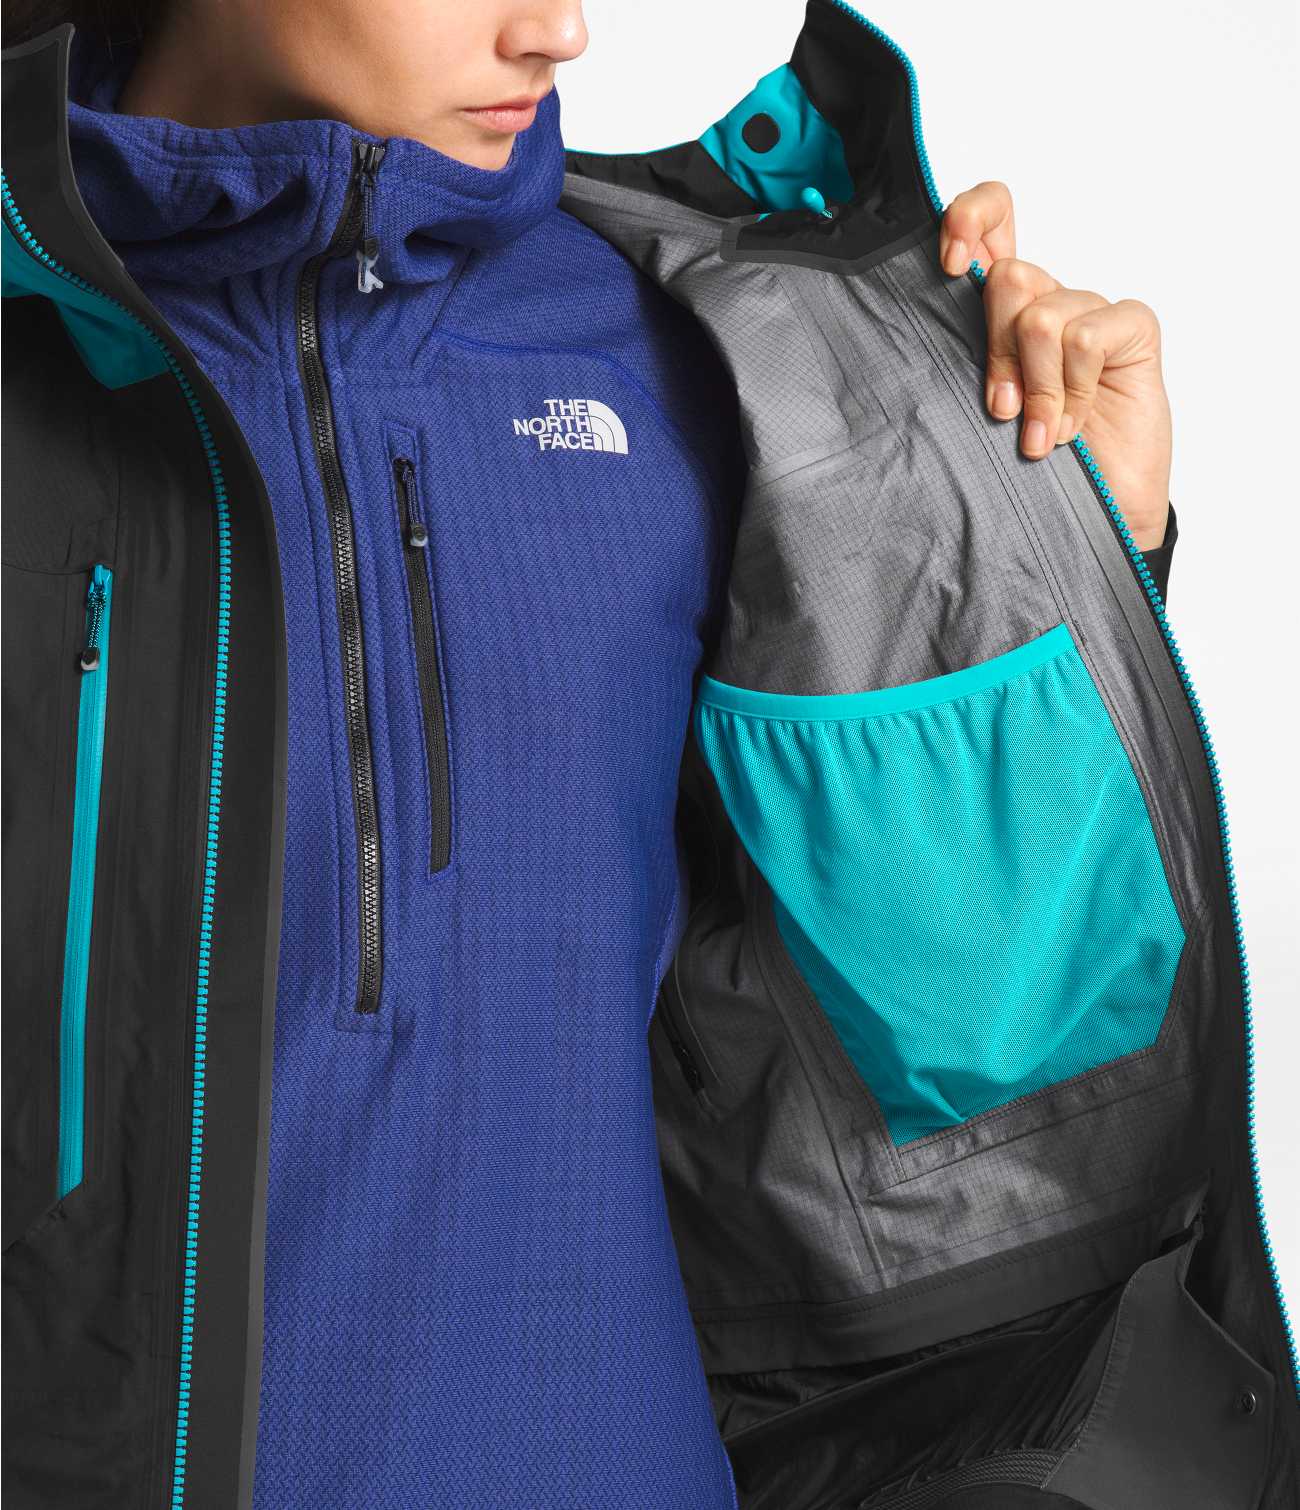 WOMEN'S SUMMIT L5 GORE-TEX® PRO JACKET | The North Face | The